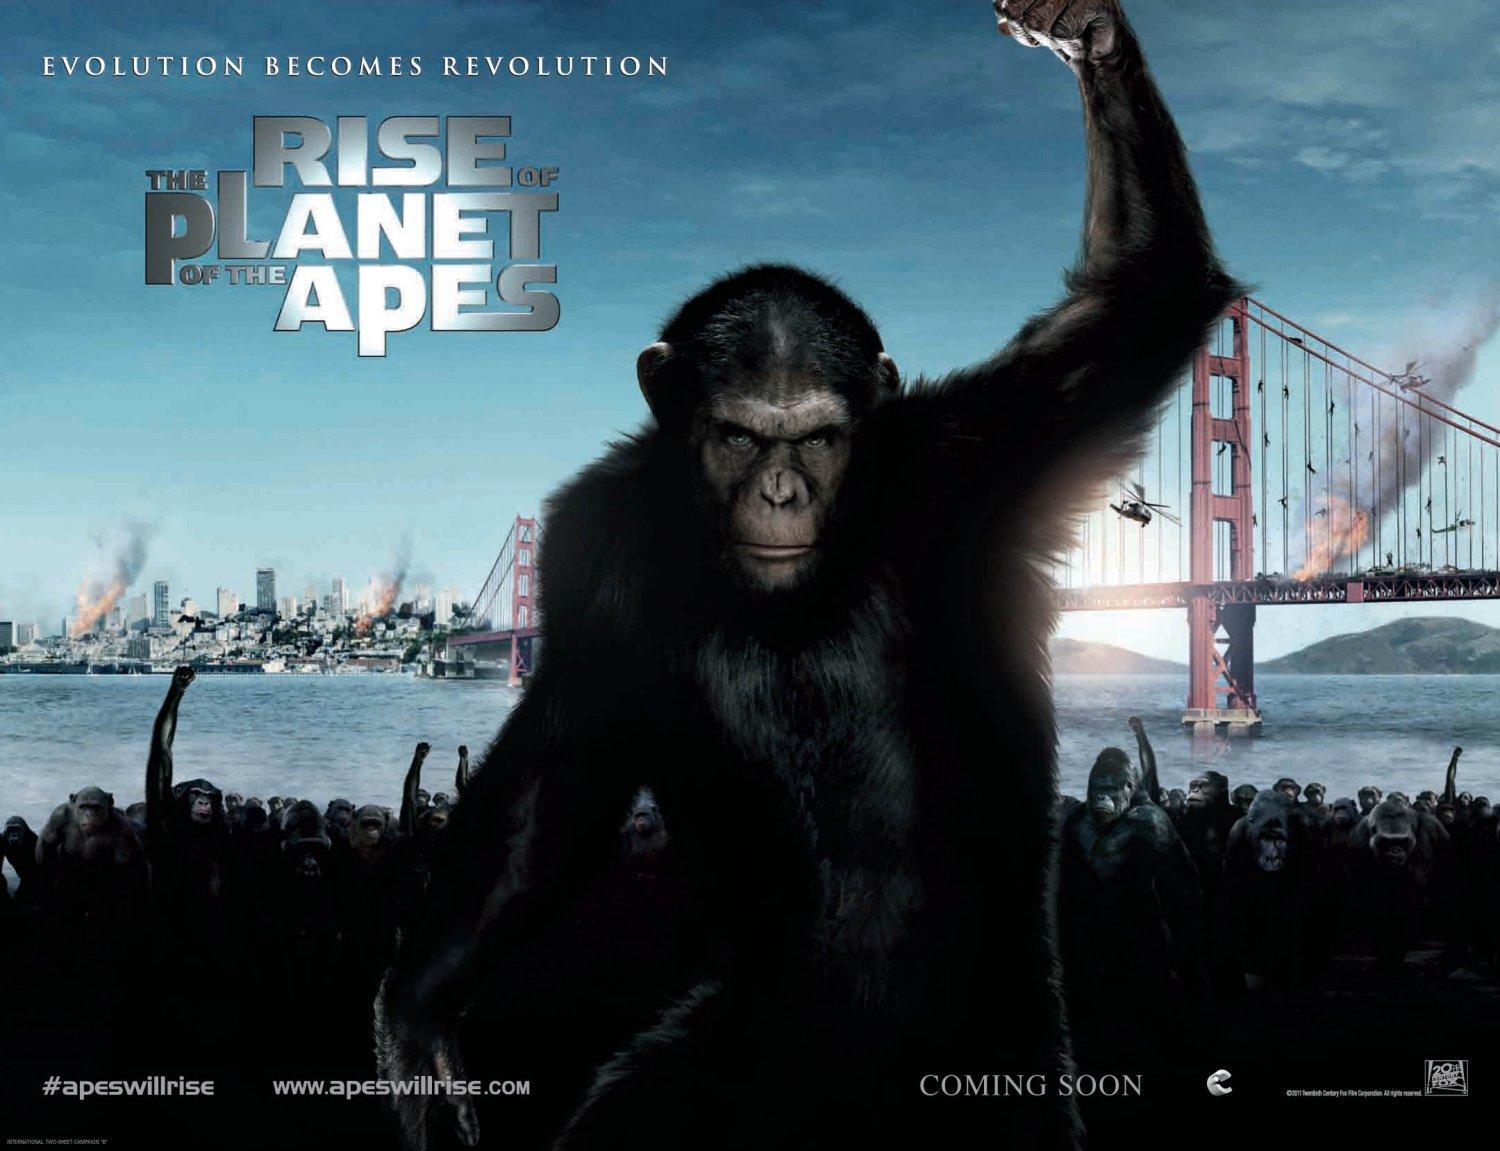 james franco rise of the planet of the apes